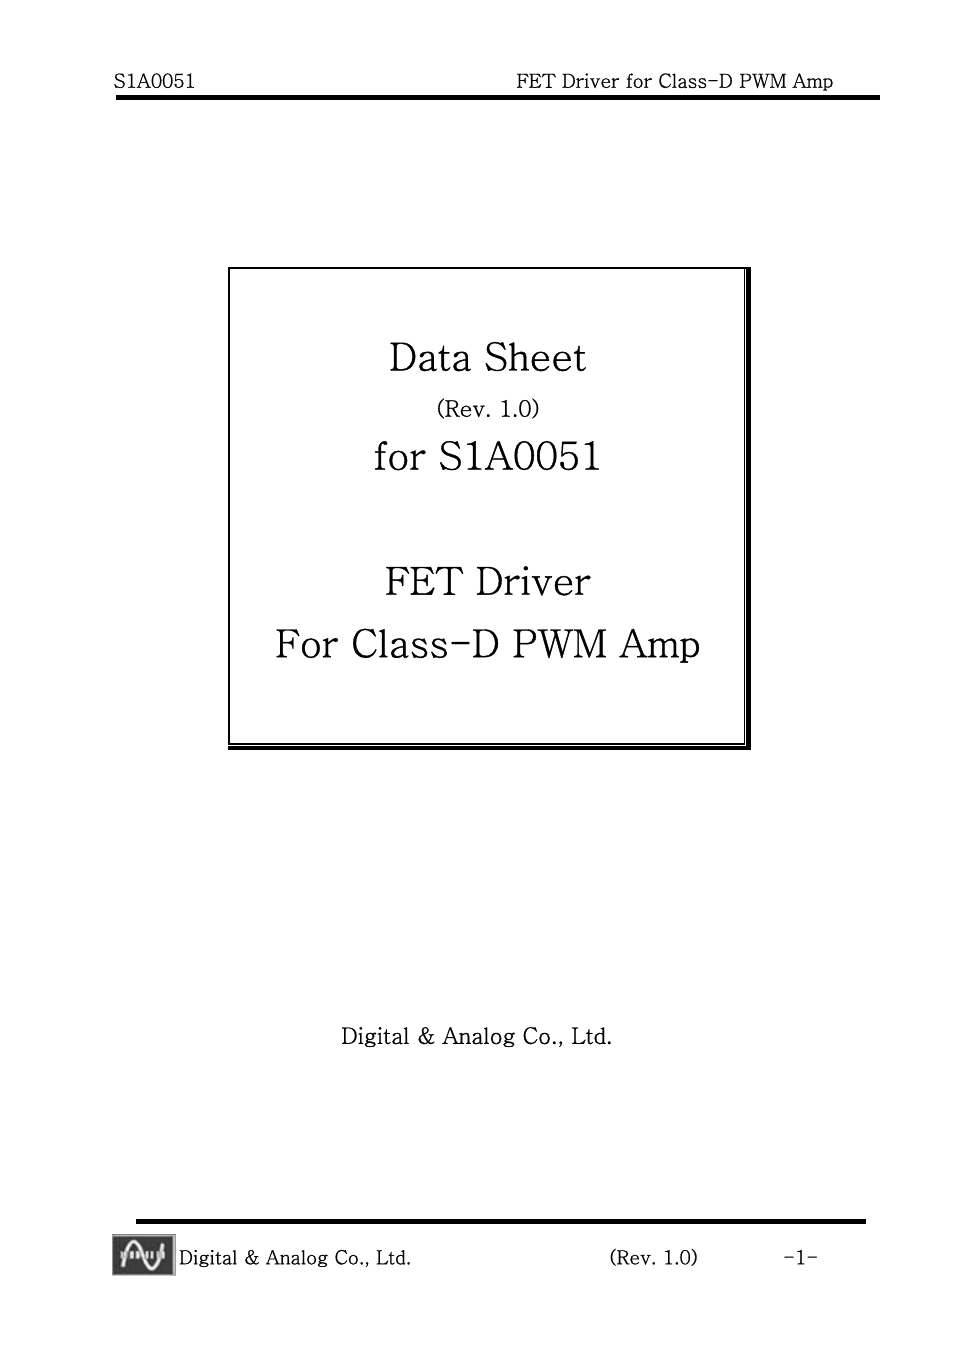 S1A0051 - FET Driver for Class-D PWM Amp